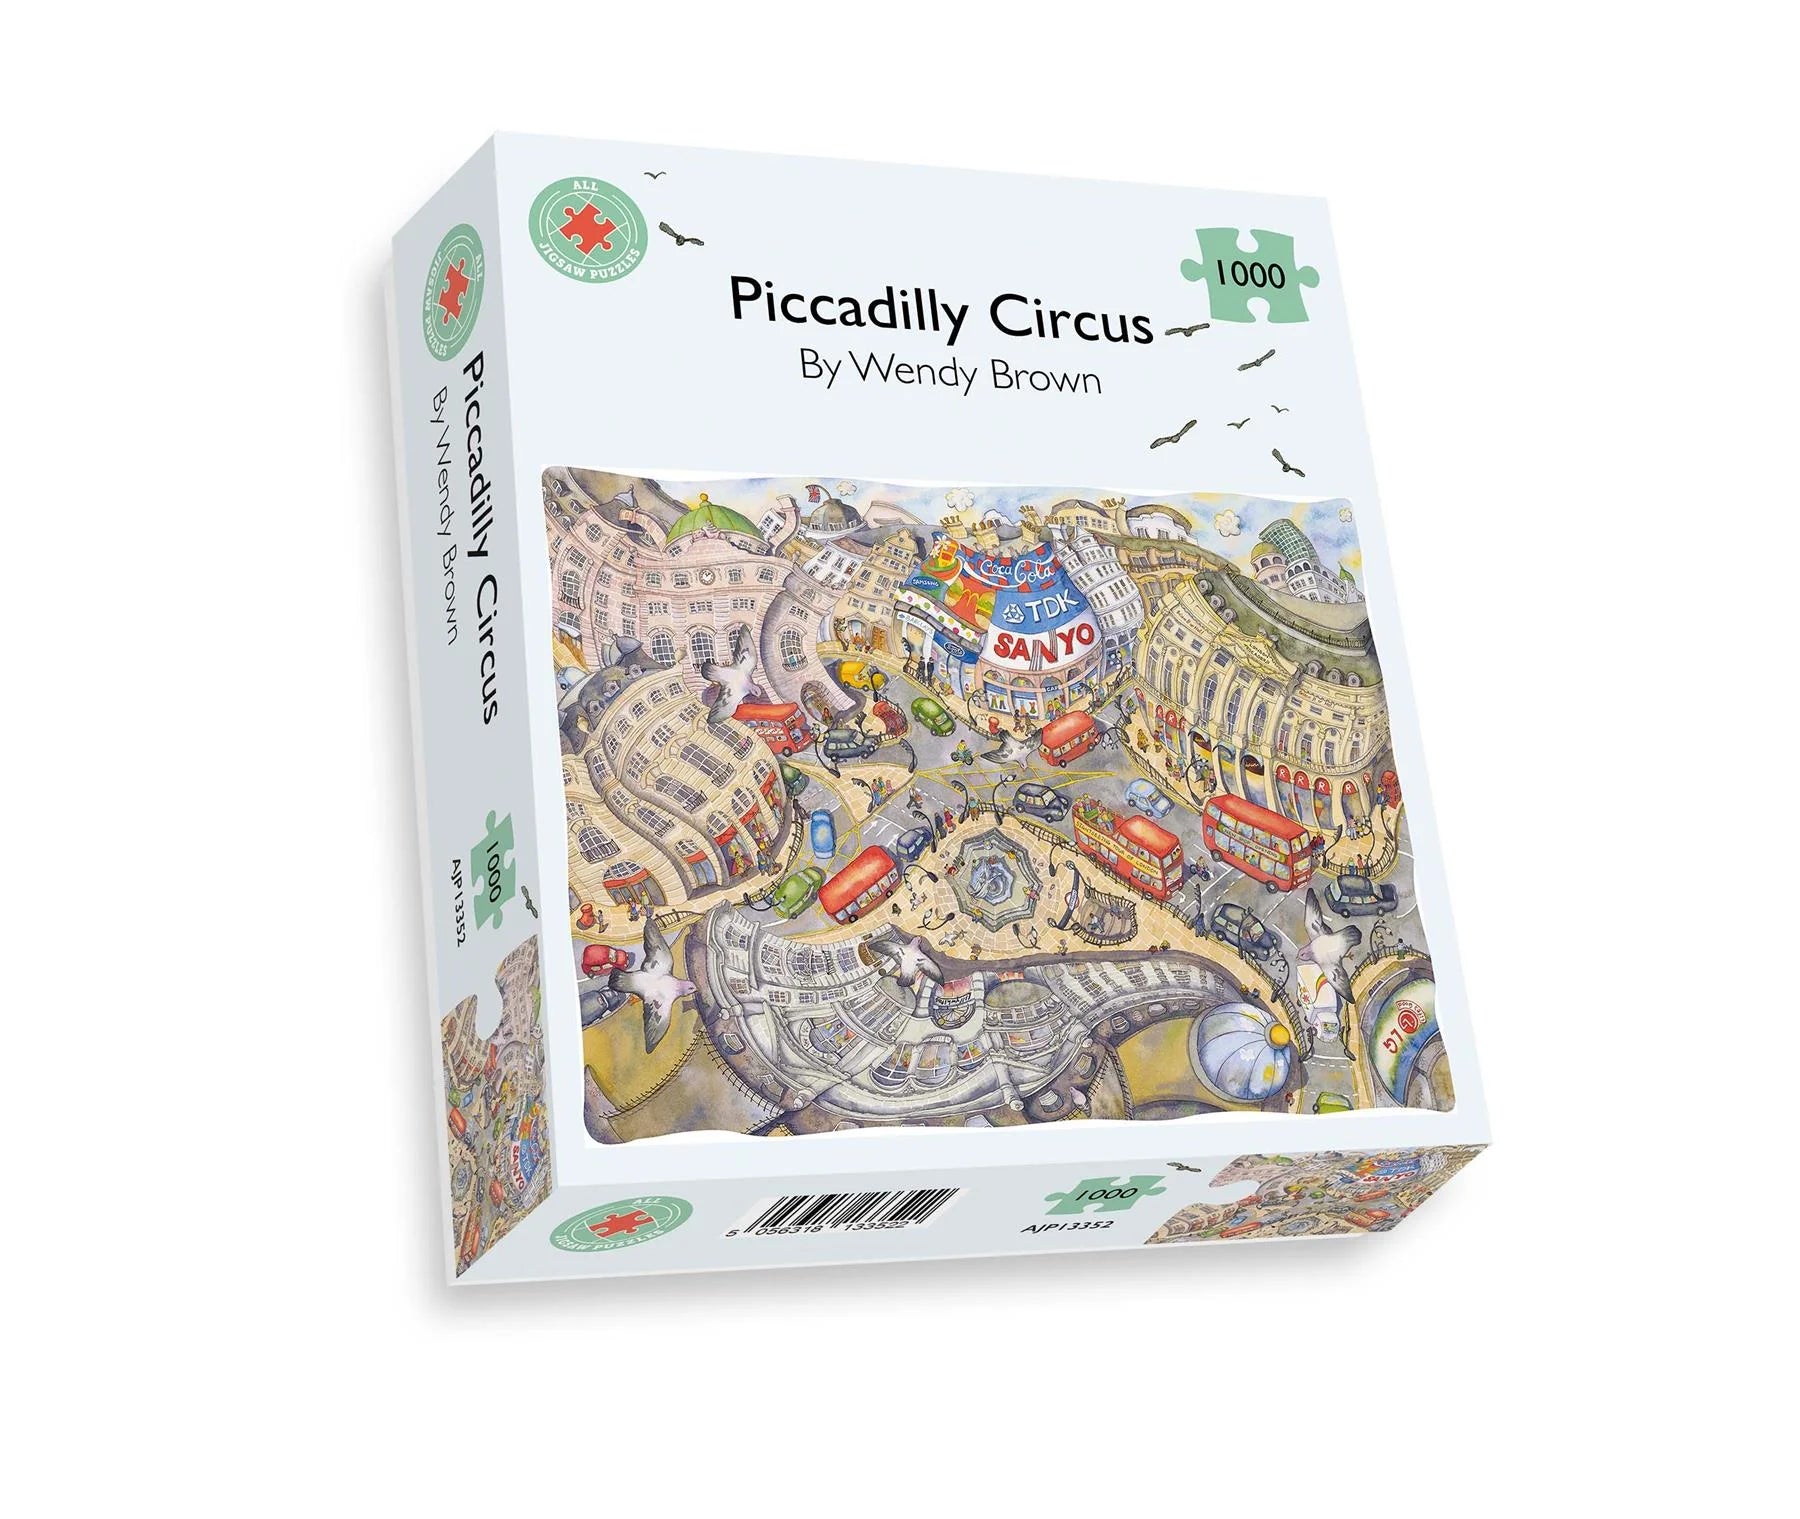 Piccadilly Circus 1000 Piece Jigsaw Puzzle